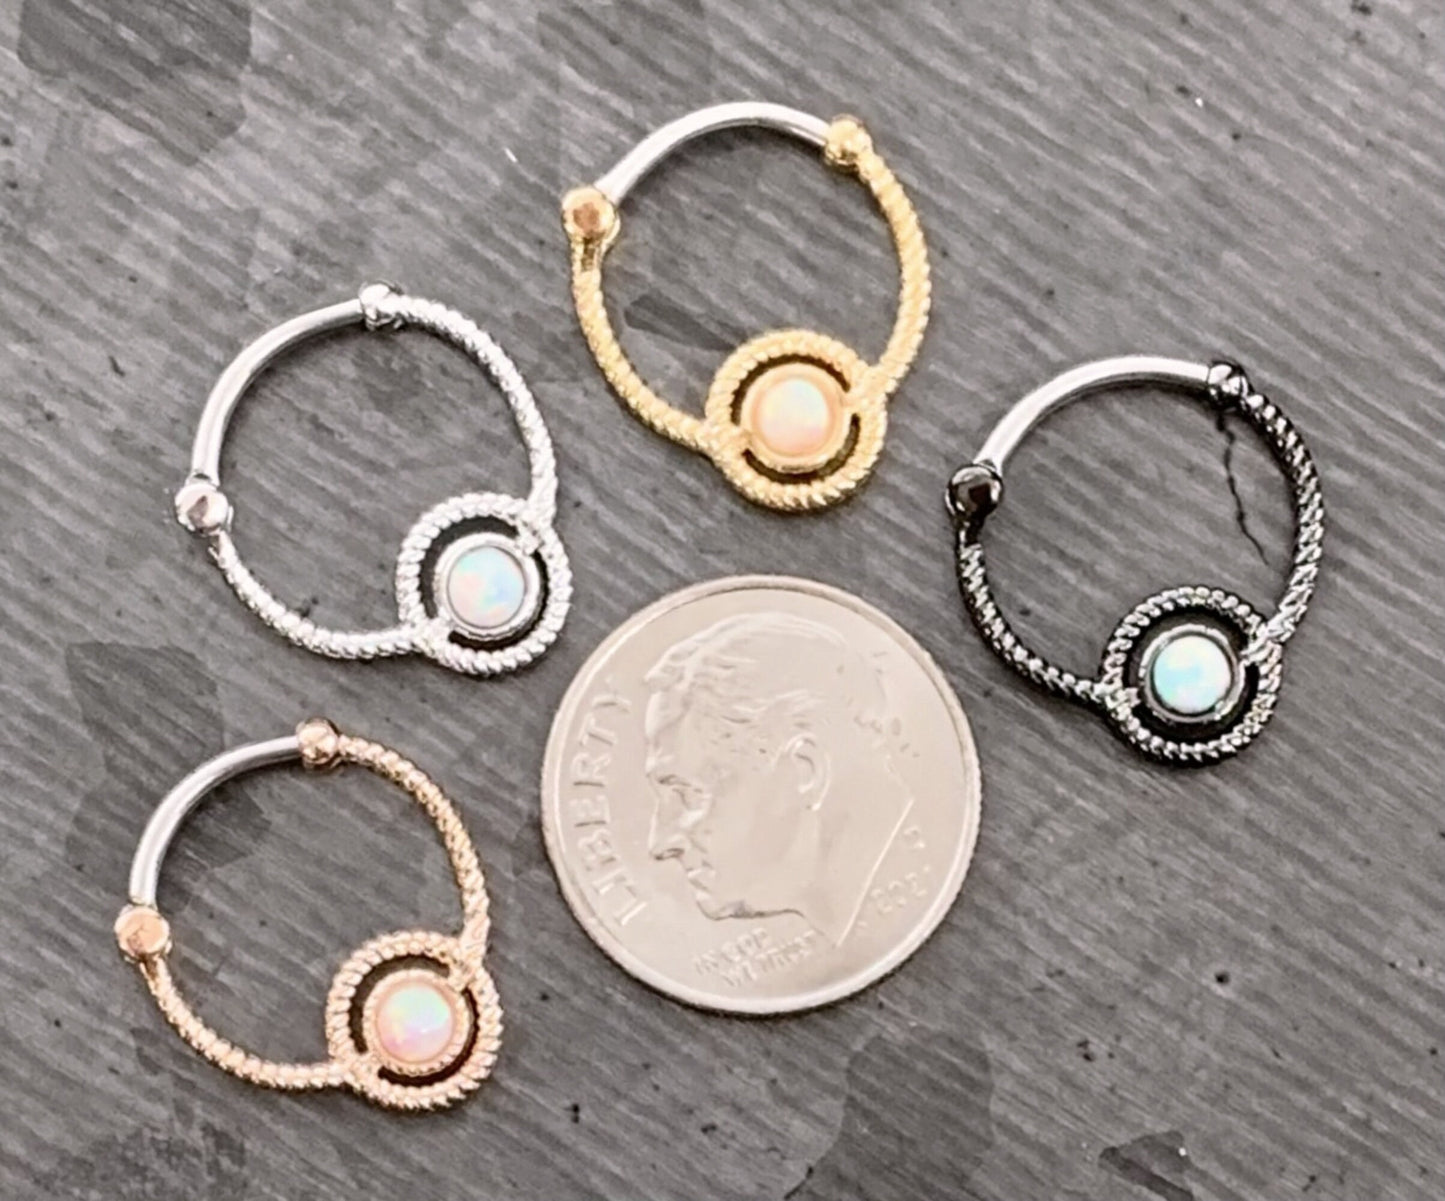 1 Piece Opal Roped Circle Design Septum Clicker Ring - 16g - Gold, Rose Gold, Rhodium and Steel!